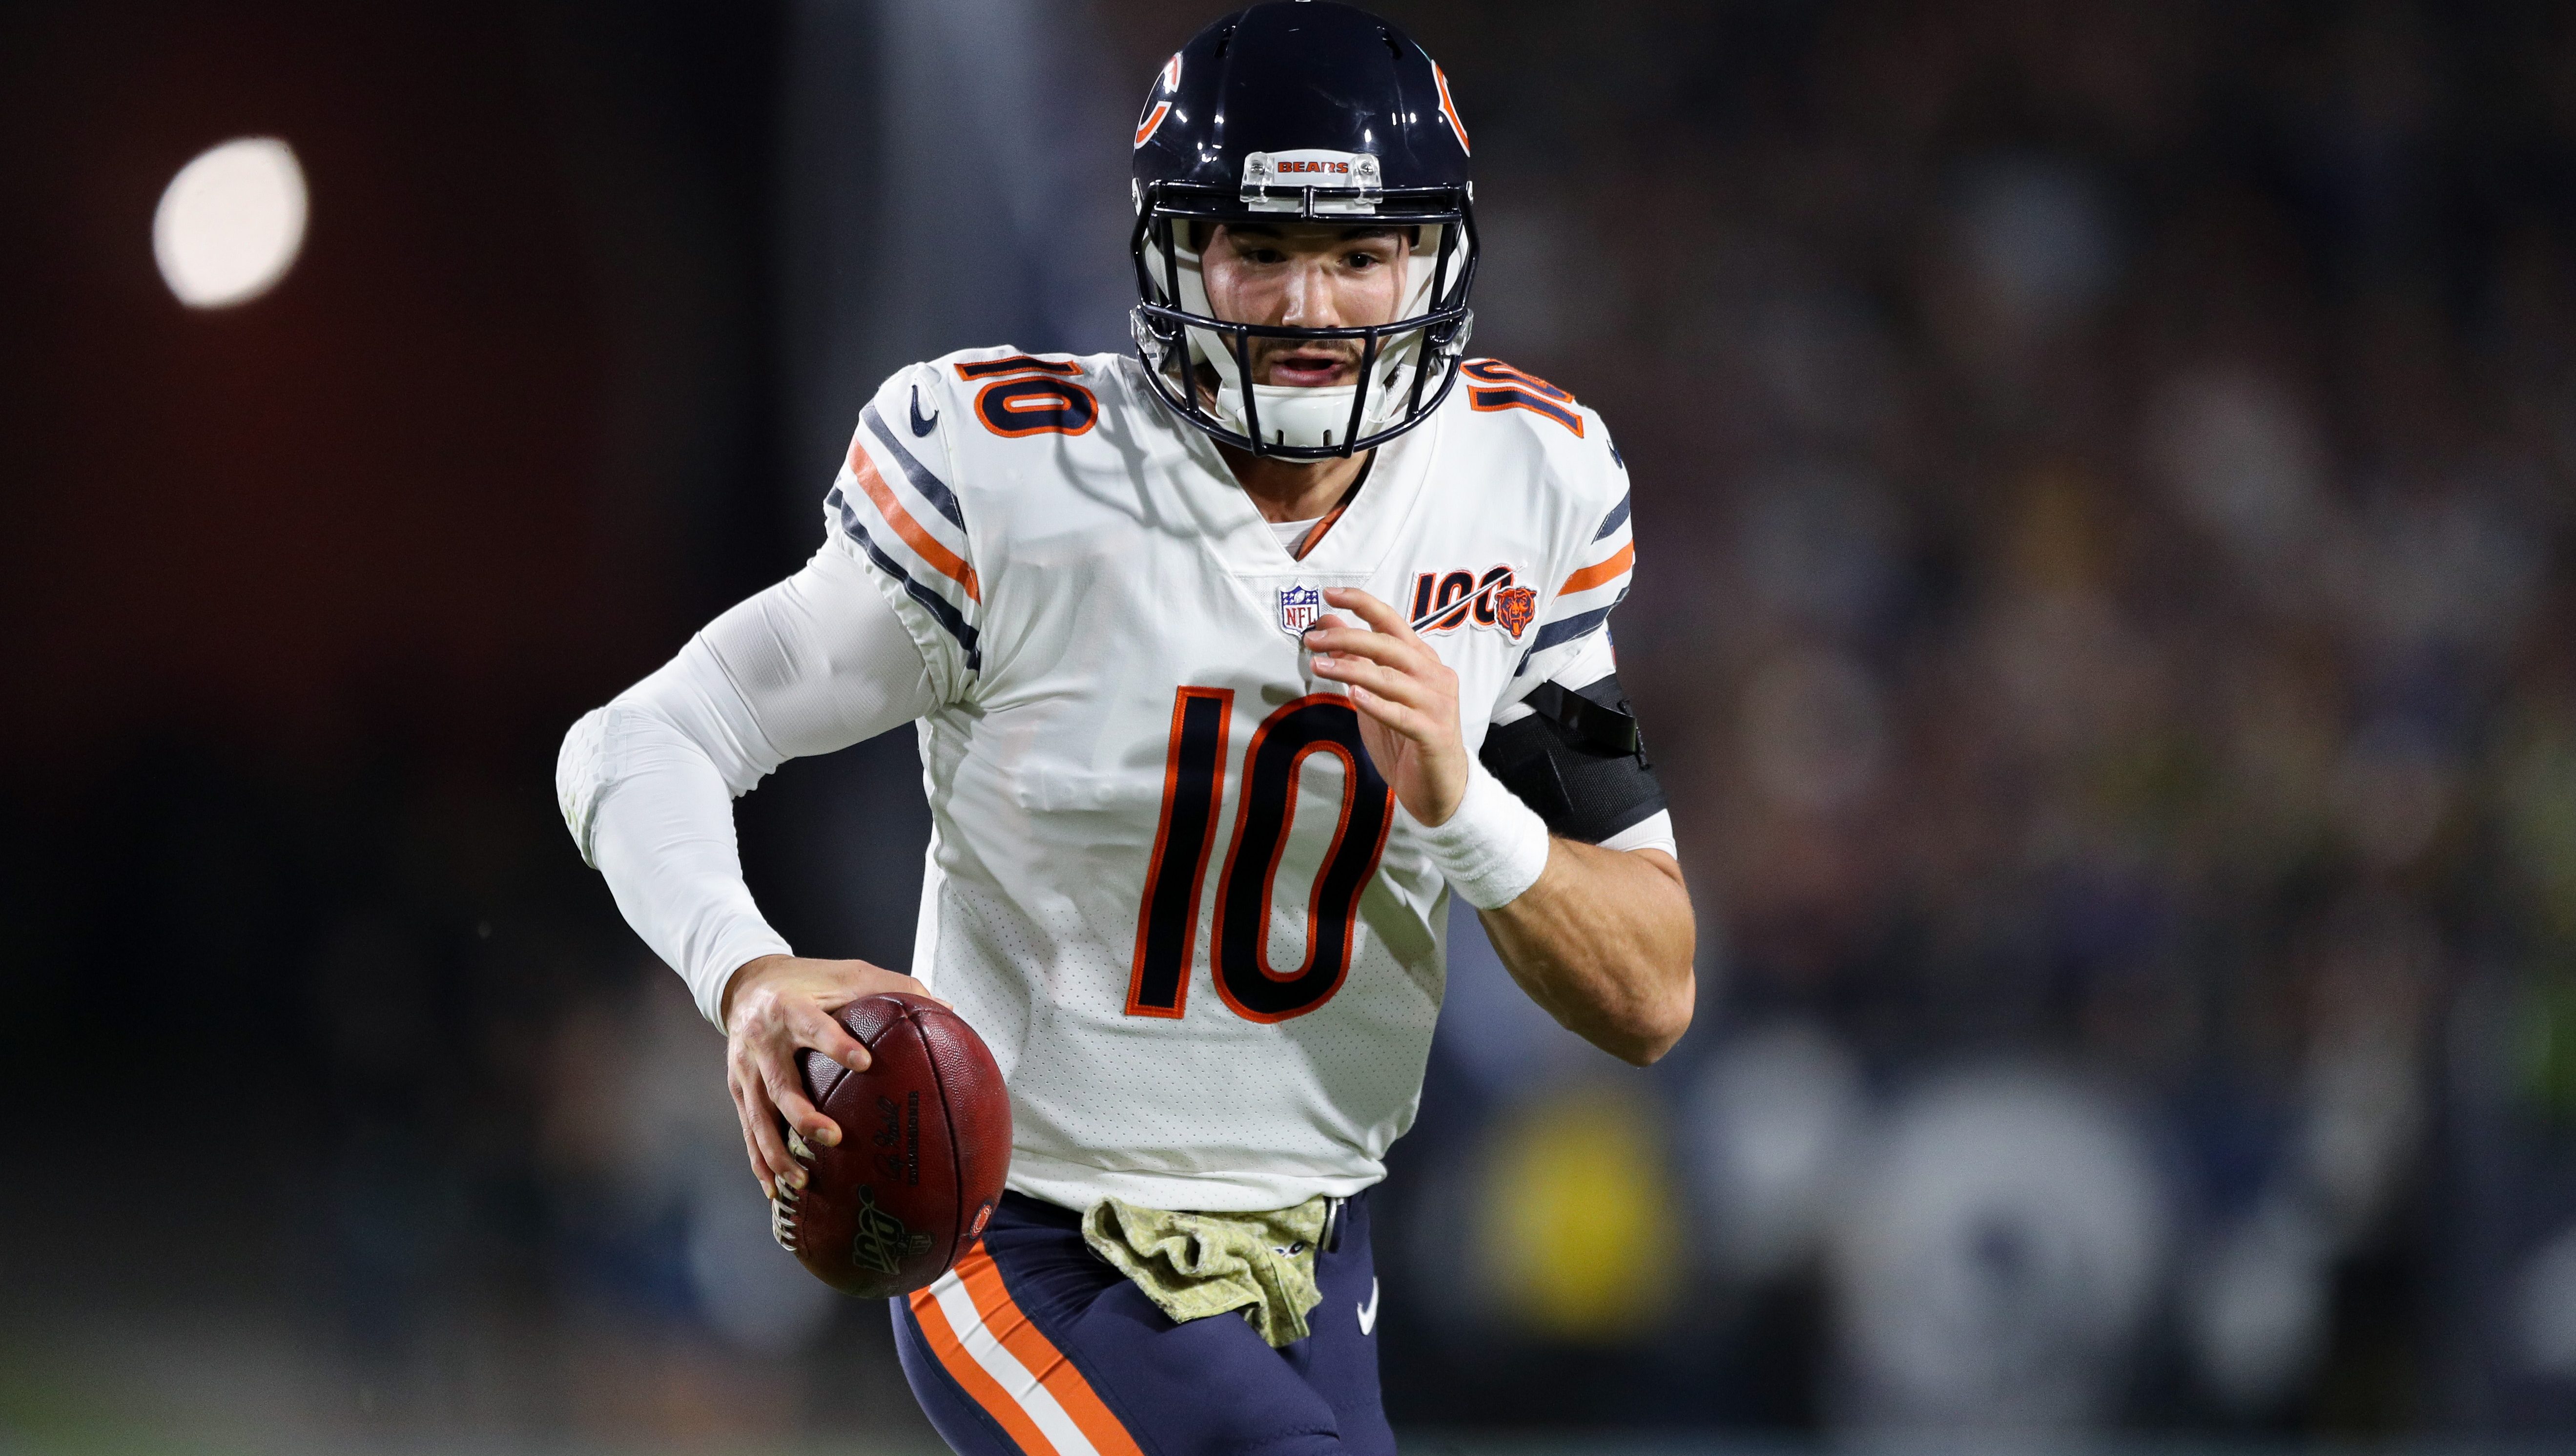 James Conner Has Warning About Bears QB Mitchell Trubisky